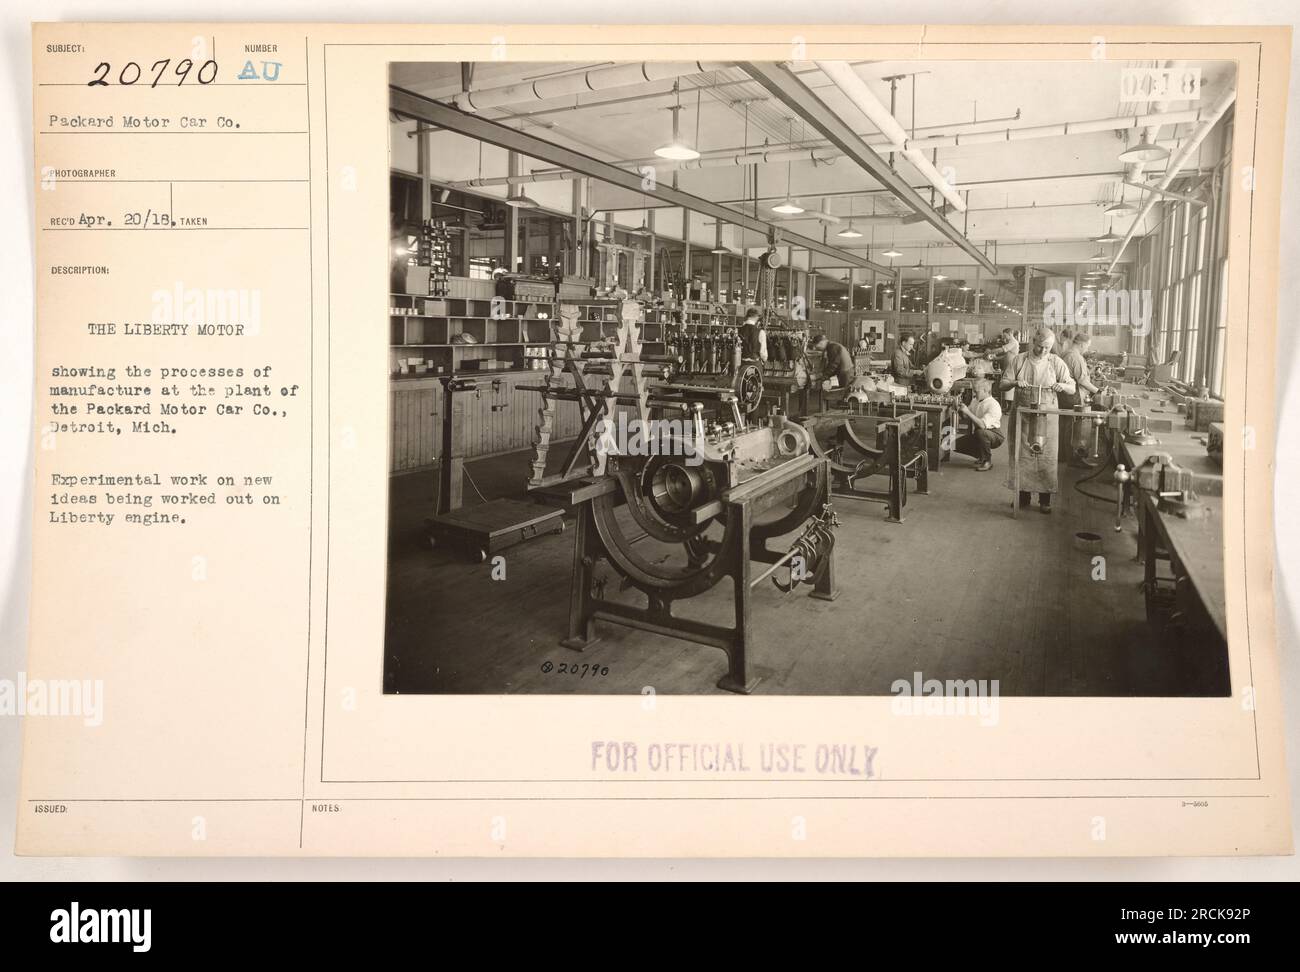 Experimental work on the Liberty motor underway at the Packard Motor Car Co. plant in Detroit, Michigan. The photograph shows the manufacturing processes involved and the testing of new ideas for the engine. An official document, it is marked as 'For Official Use Only.' Stock Photo